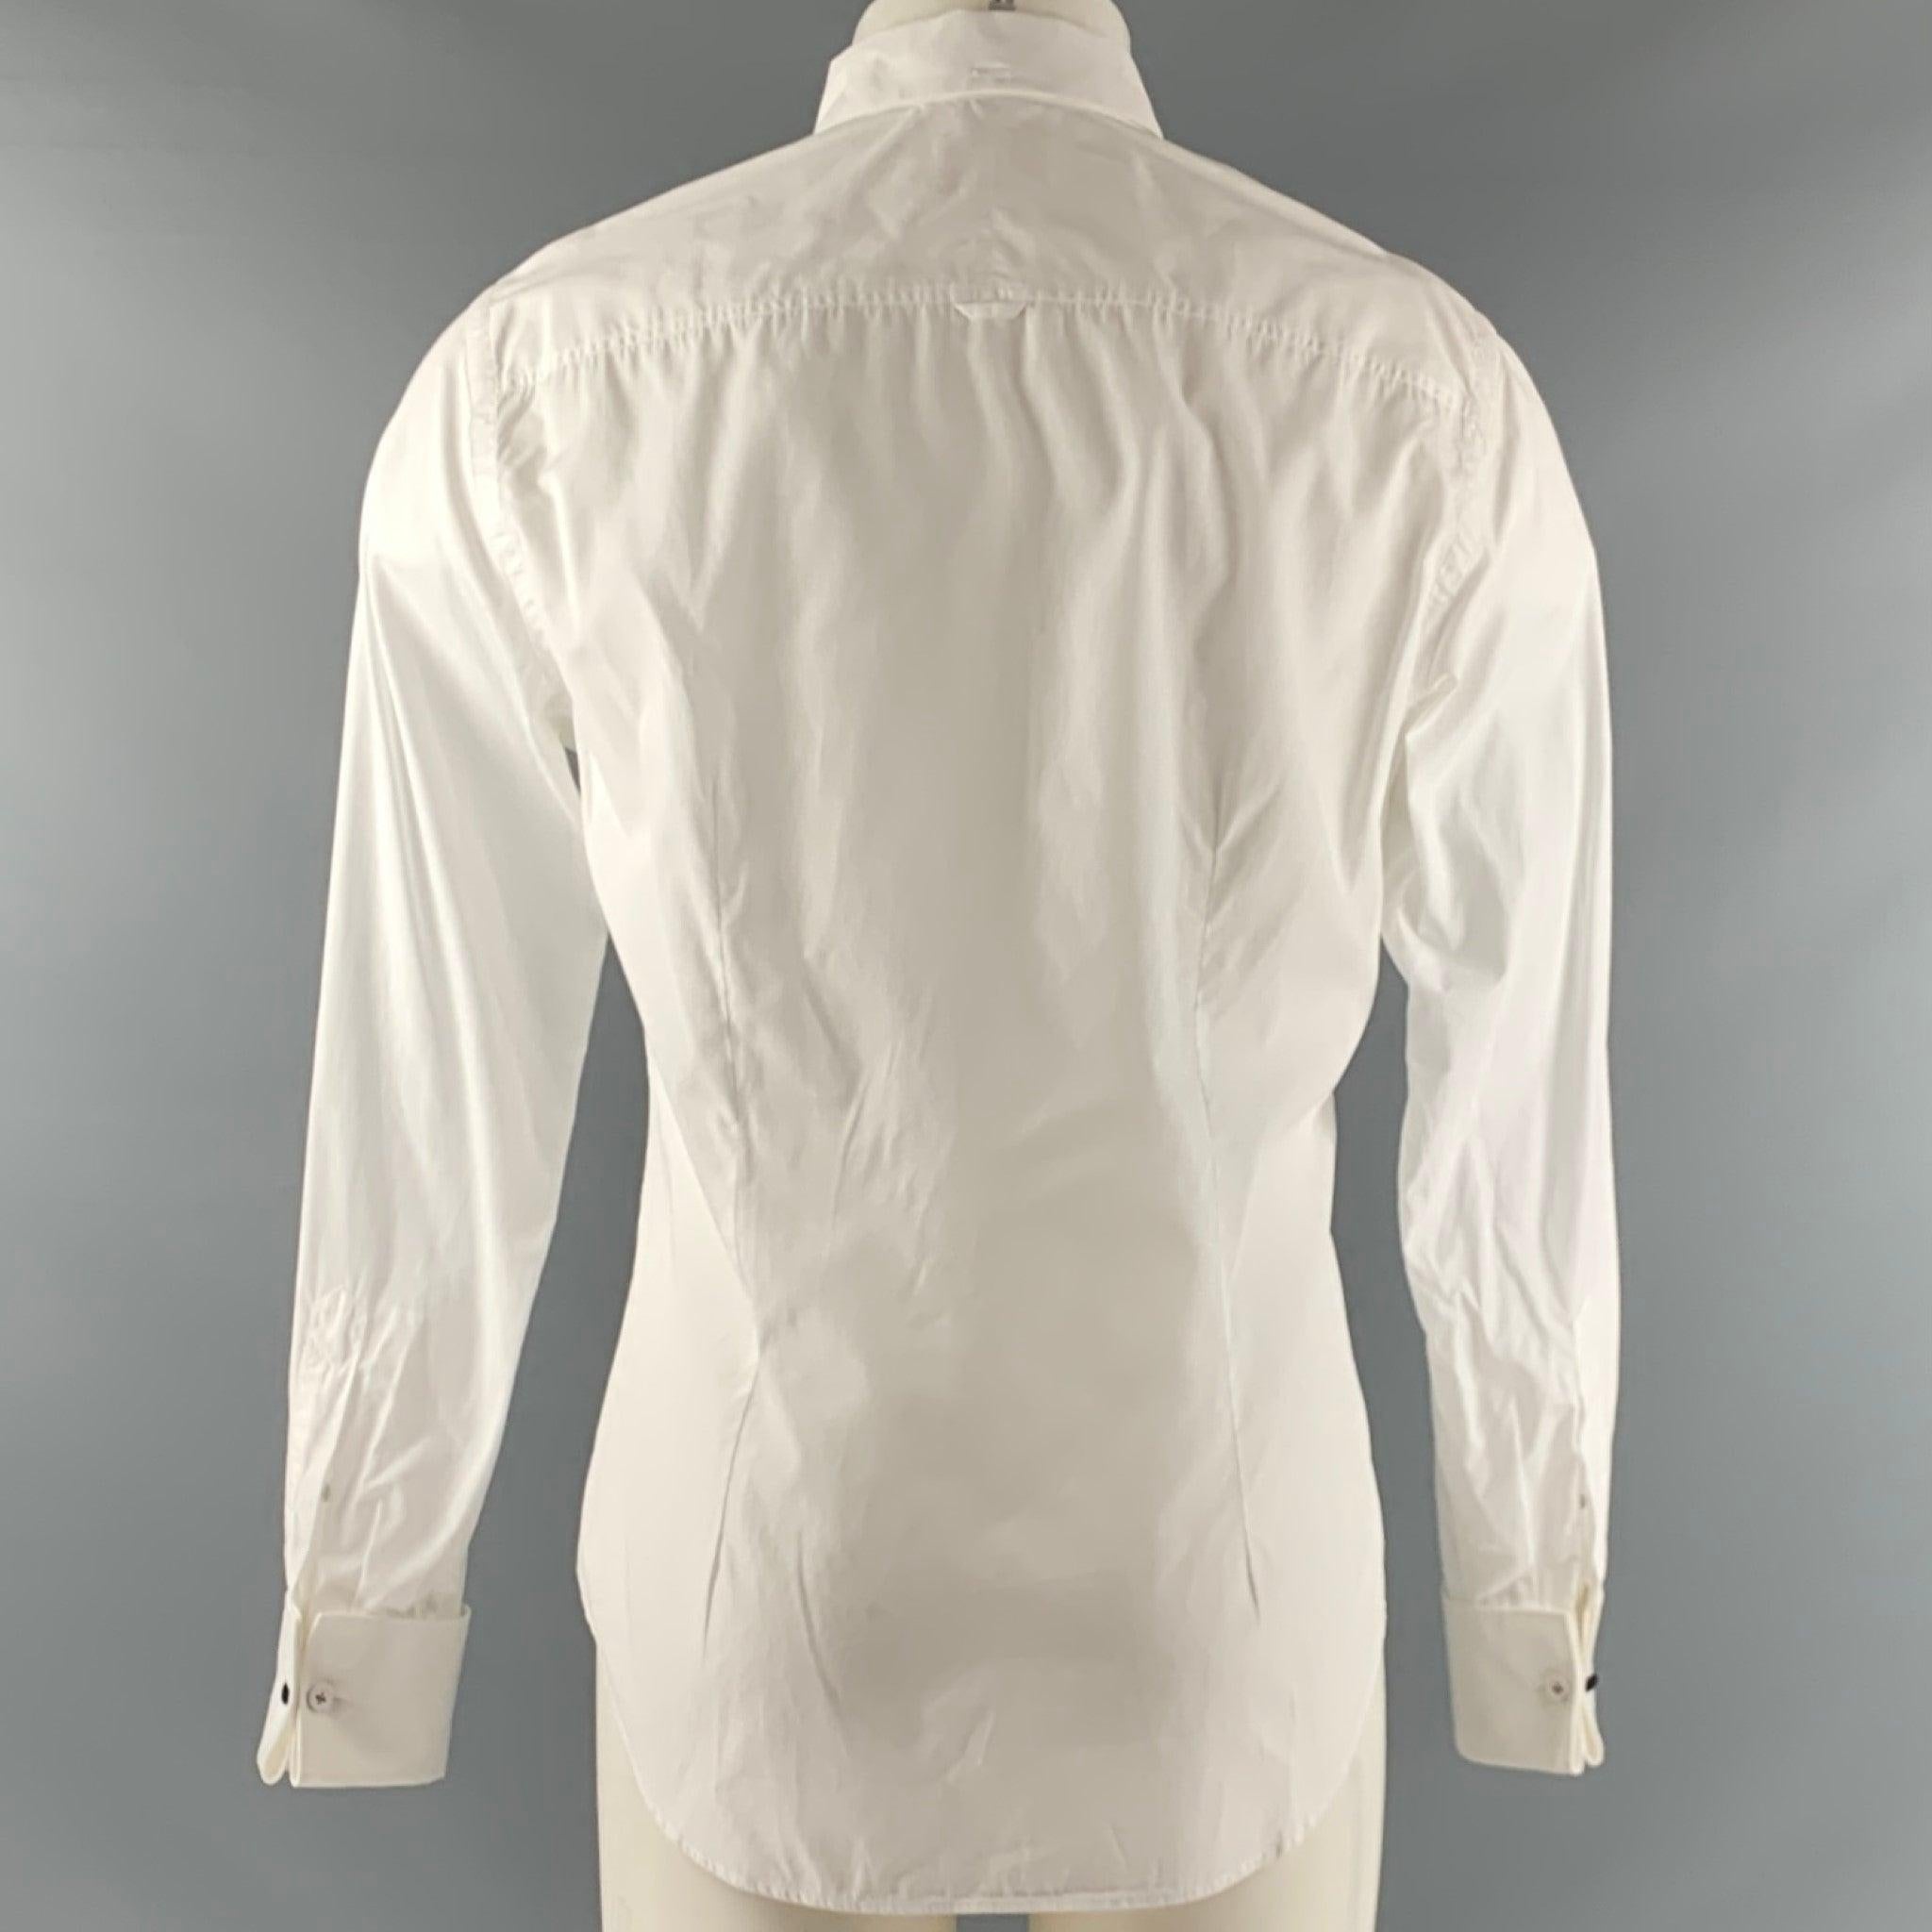 Men's BAND OF OUTSIDERS Size M White Cotton Tuxedo Long Sleeve Shirt For Sale